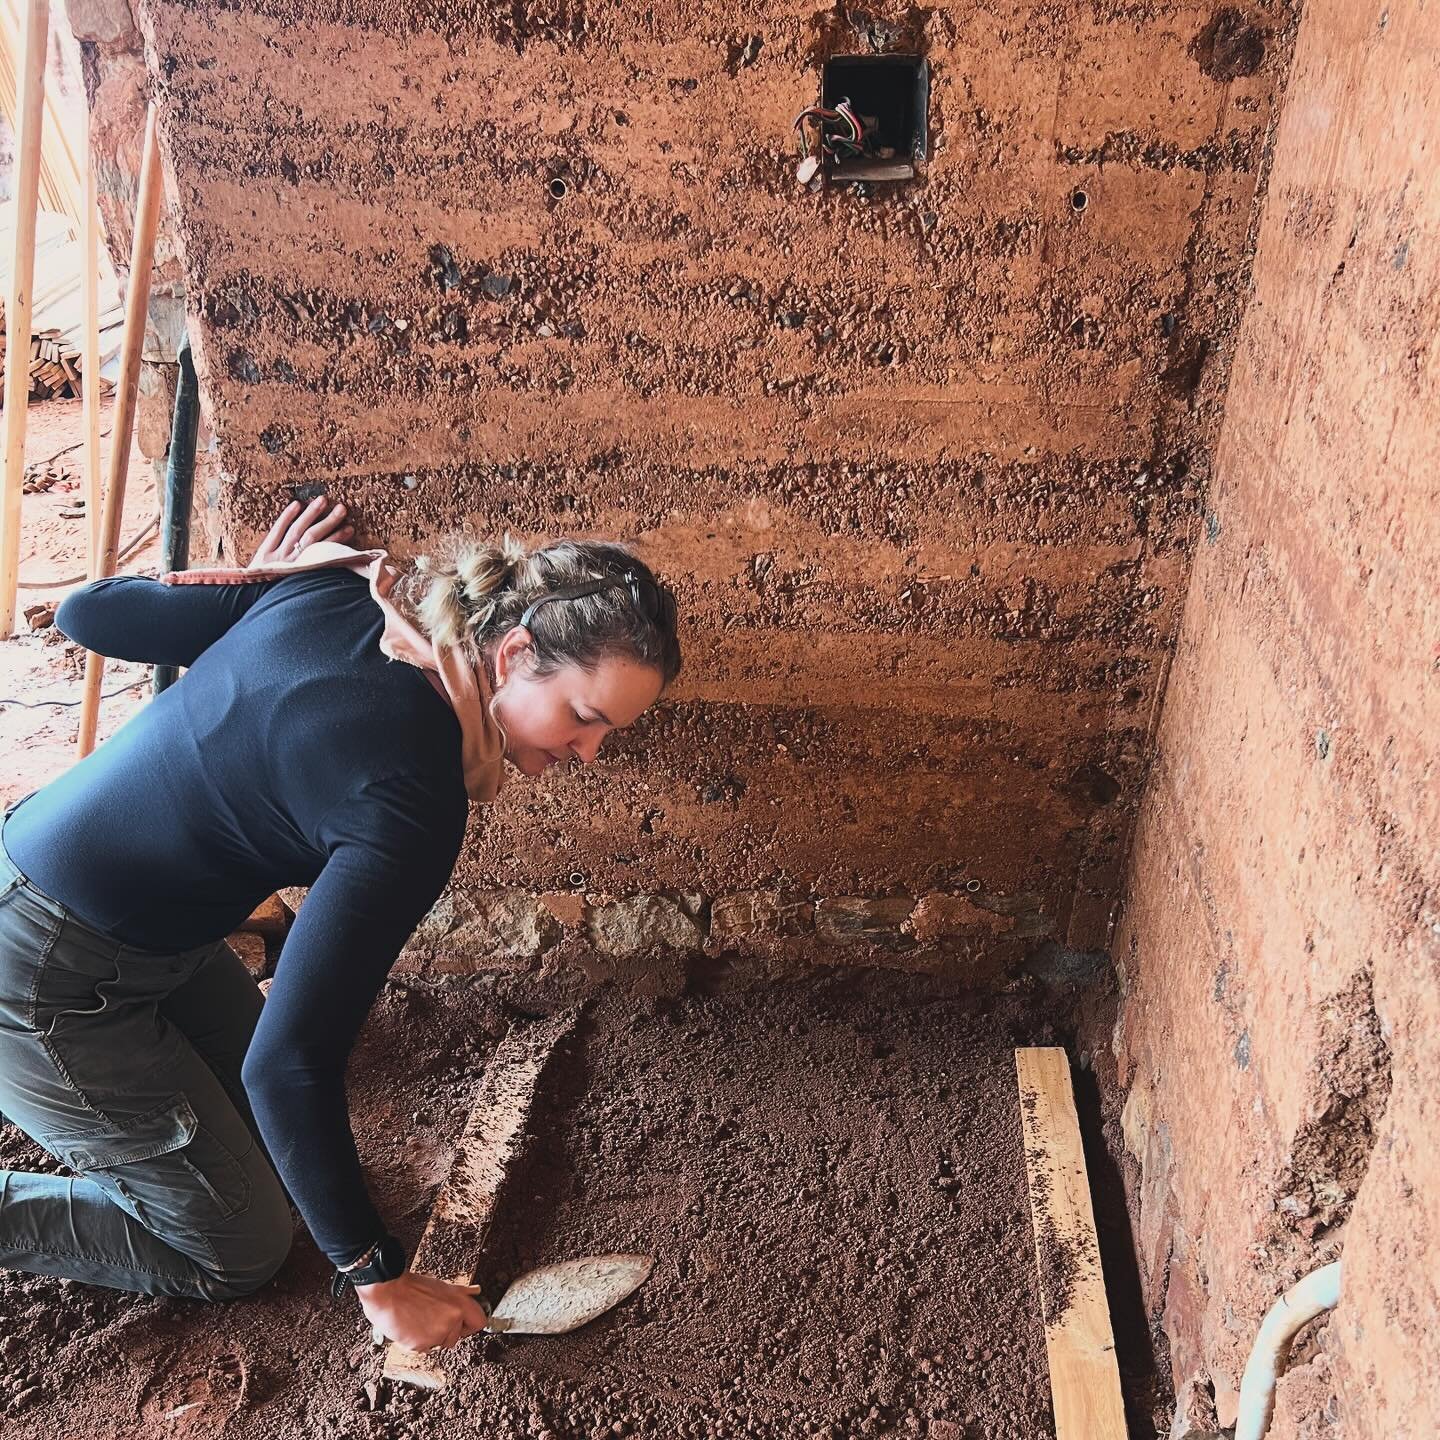 We are doing a rammed earth floor test today. A first time for everything 😁

#rammedearth #rammedeartharchitecture #rammedearthfloor #rammedearthhouse #naturalbuilding #buildingwithearth